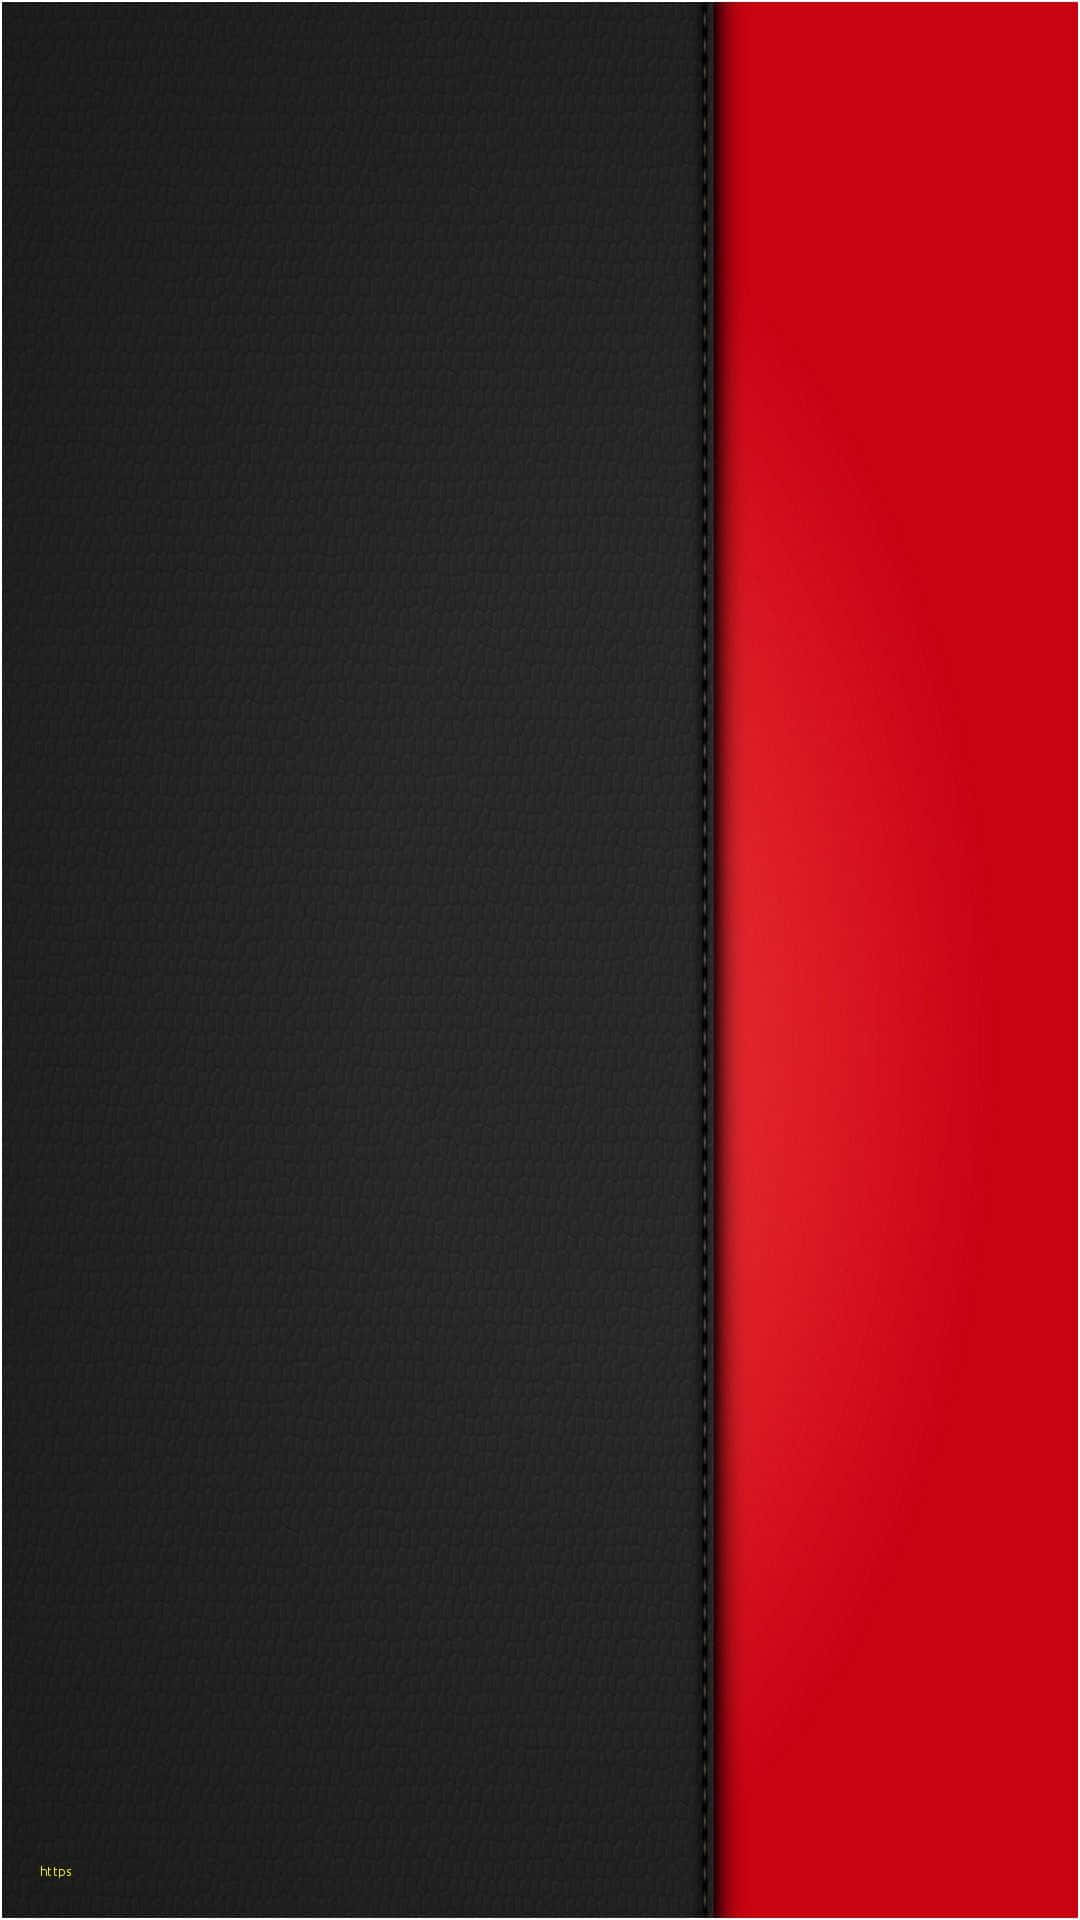 Show your style with the new Black Red iPhone Wallpaper